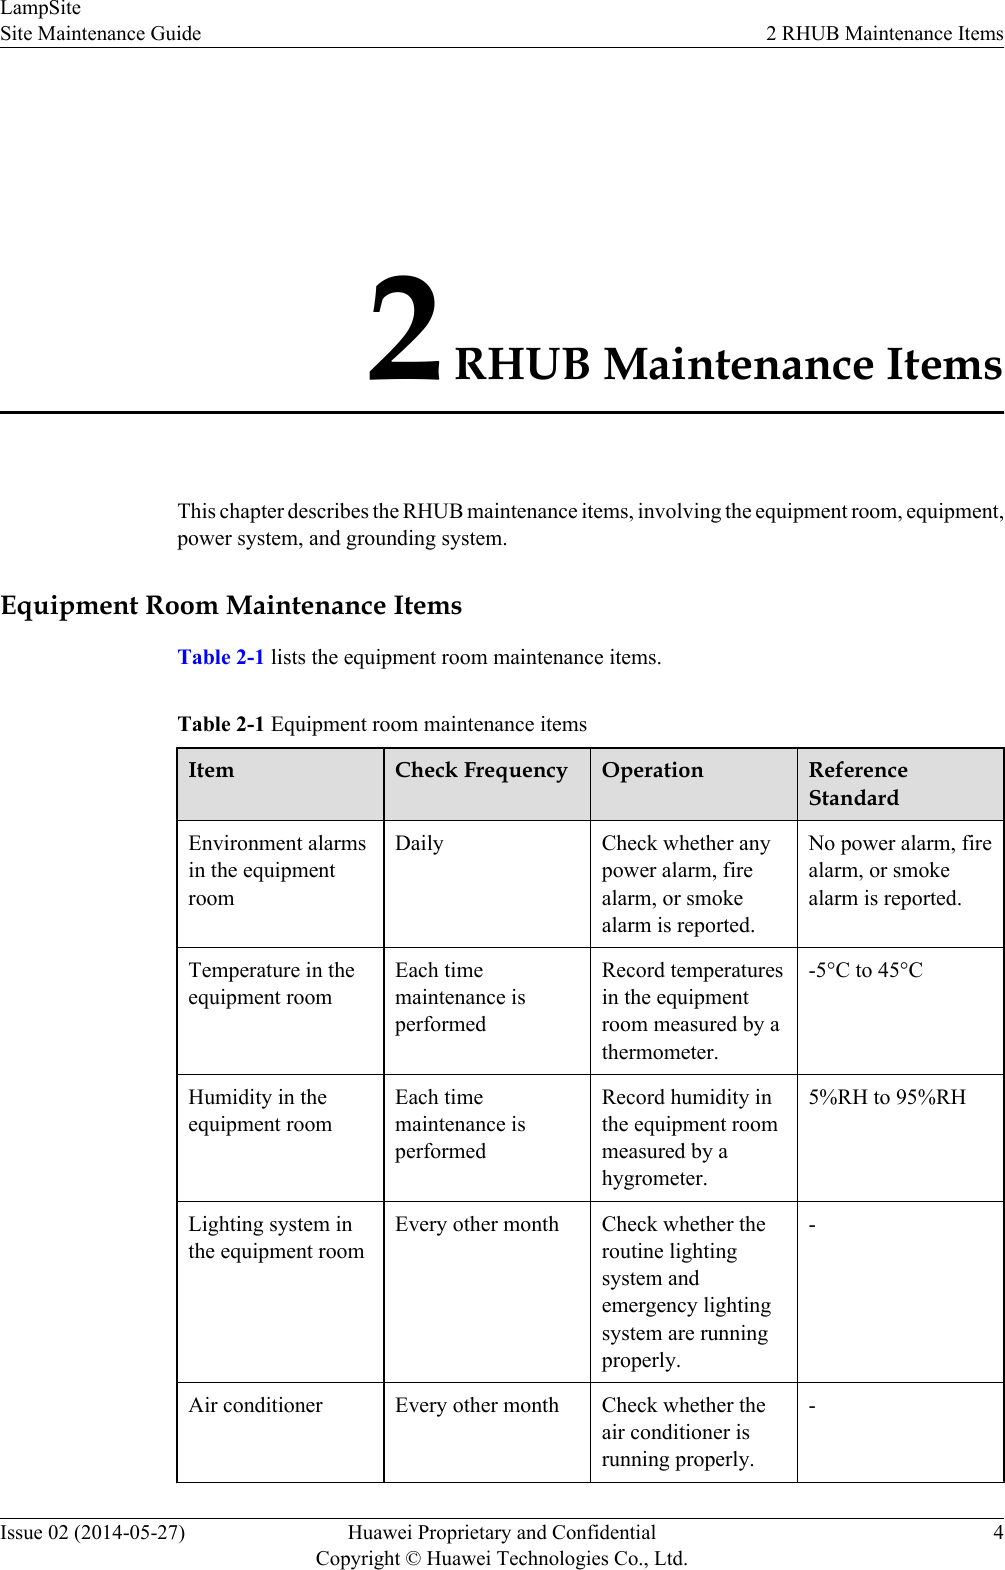 2 RHUB Maintenance ItemsThis chapter describes the RHUB maintenance items, involving the equipment room, equipment,power system, and grounding system.Equipment Room Maintenance ItemsTable 2-1 lists the equipment room maintenance items.Table 2-1 Equipment room maintenance itemsItem Check Frequency Operation ReferenceStandardEnvironment alarmsin the equipmentroomDaily Check whether anypower alarm, firealarm, or smokealarm is reported.No power alarm, firealarm, or smokealarm is reported.Temperature in theequipment roomEach timemaintenance isperformedRecord temperaturesin the equipmentroom measured by athermometer.-5°C to 45°CHumidity in theequipment roomEach timemaintenance isperformedRecord humidity inthe equipment roommeasured by ahygrometer.5%RH to 95%RHLighting system inthe equipment roomEvery other month Check whether theroutine lightingsystem andemergency lightingsystem are runningproperly.-Air conditioner Every other month Check whether theair conditioner isrunning properly.-LampSiteSite Maintenance Guide 2 RHUB Maintenance ItemsIssue 02 (2014-05-27) Huawei Proprietary and ConfidentialCopyright © Huawei Technologies Co., Ltd.4